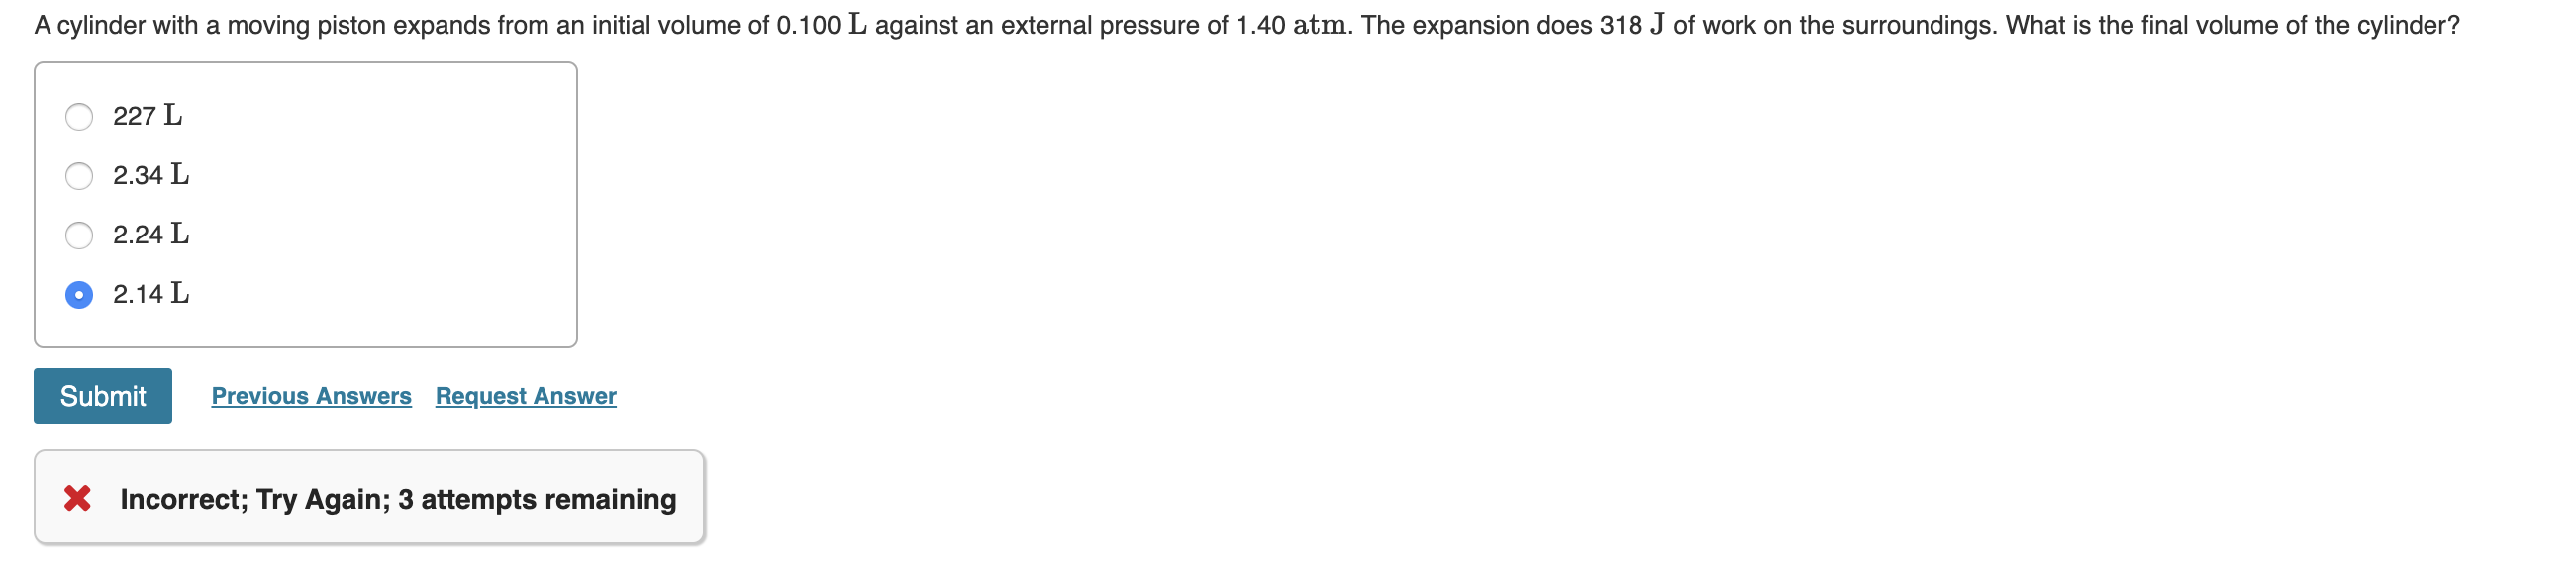 A cylinder with a moving piston expands from an initial volume of 0.100 L against an external pressure of 1.40 atm. The expansion does 318 J of work on the surroundings. What is the final volume of the cylinder?
227 L
2.34 L
2.24 L
2.14 L
Previous Answers Request Answer
Submit
* Incorrect; Try Again; 3 attempts remaining
